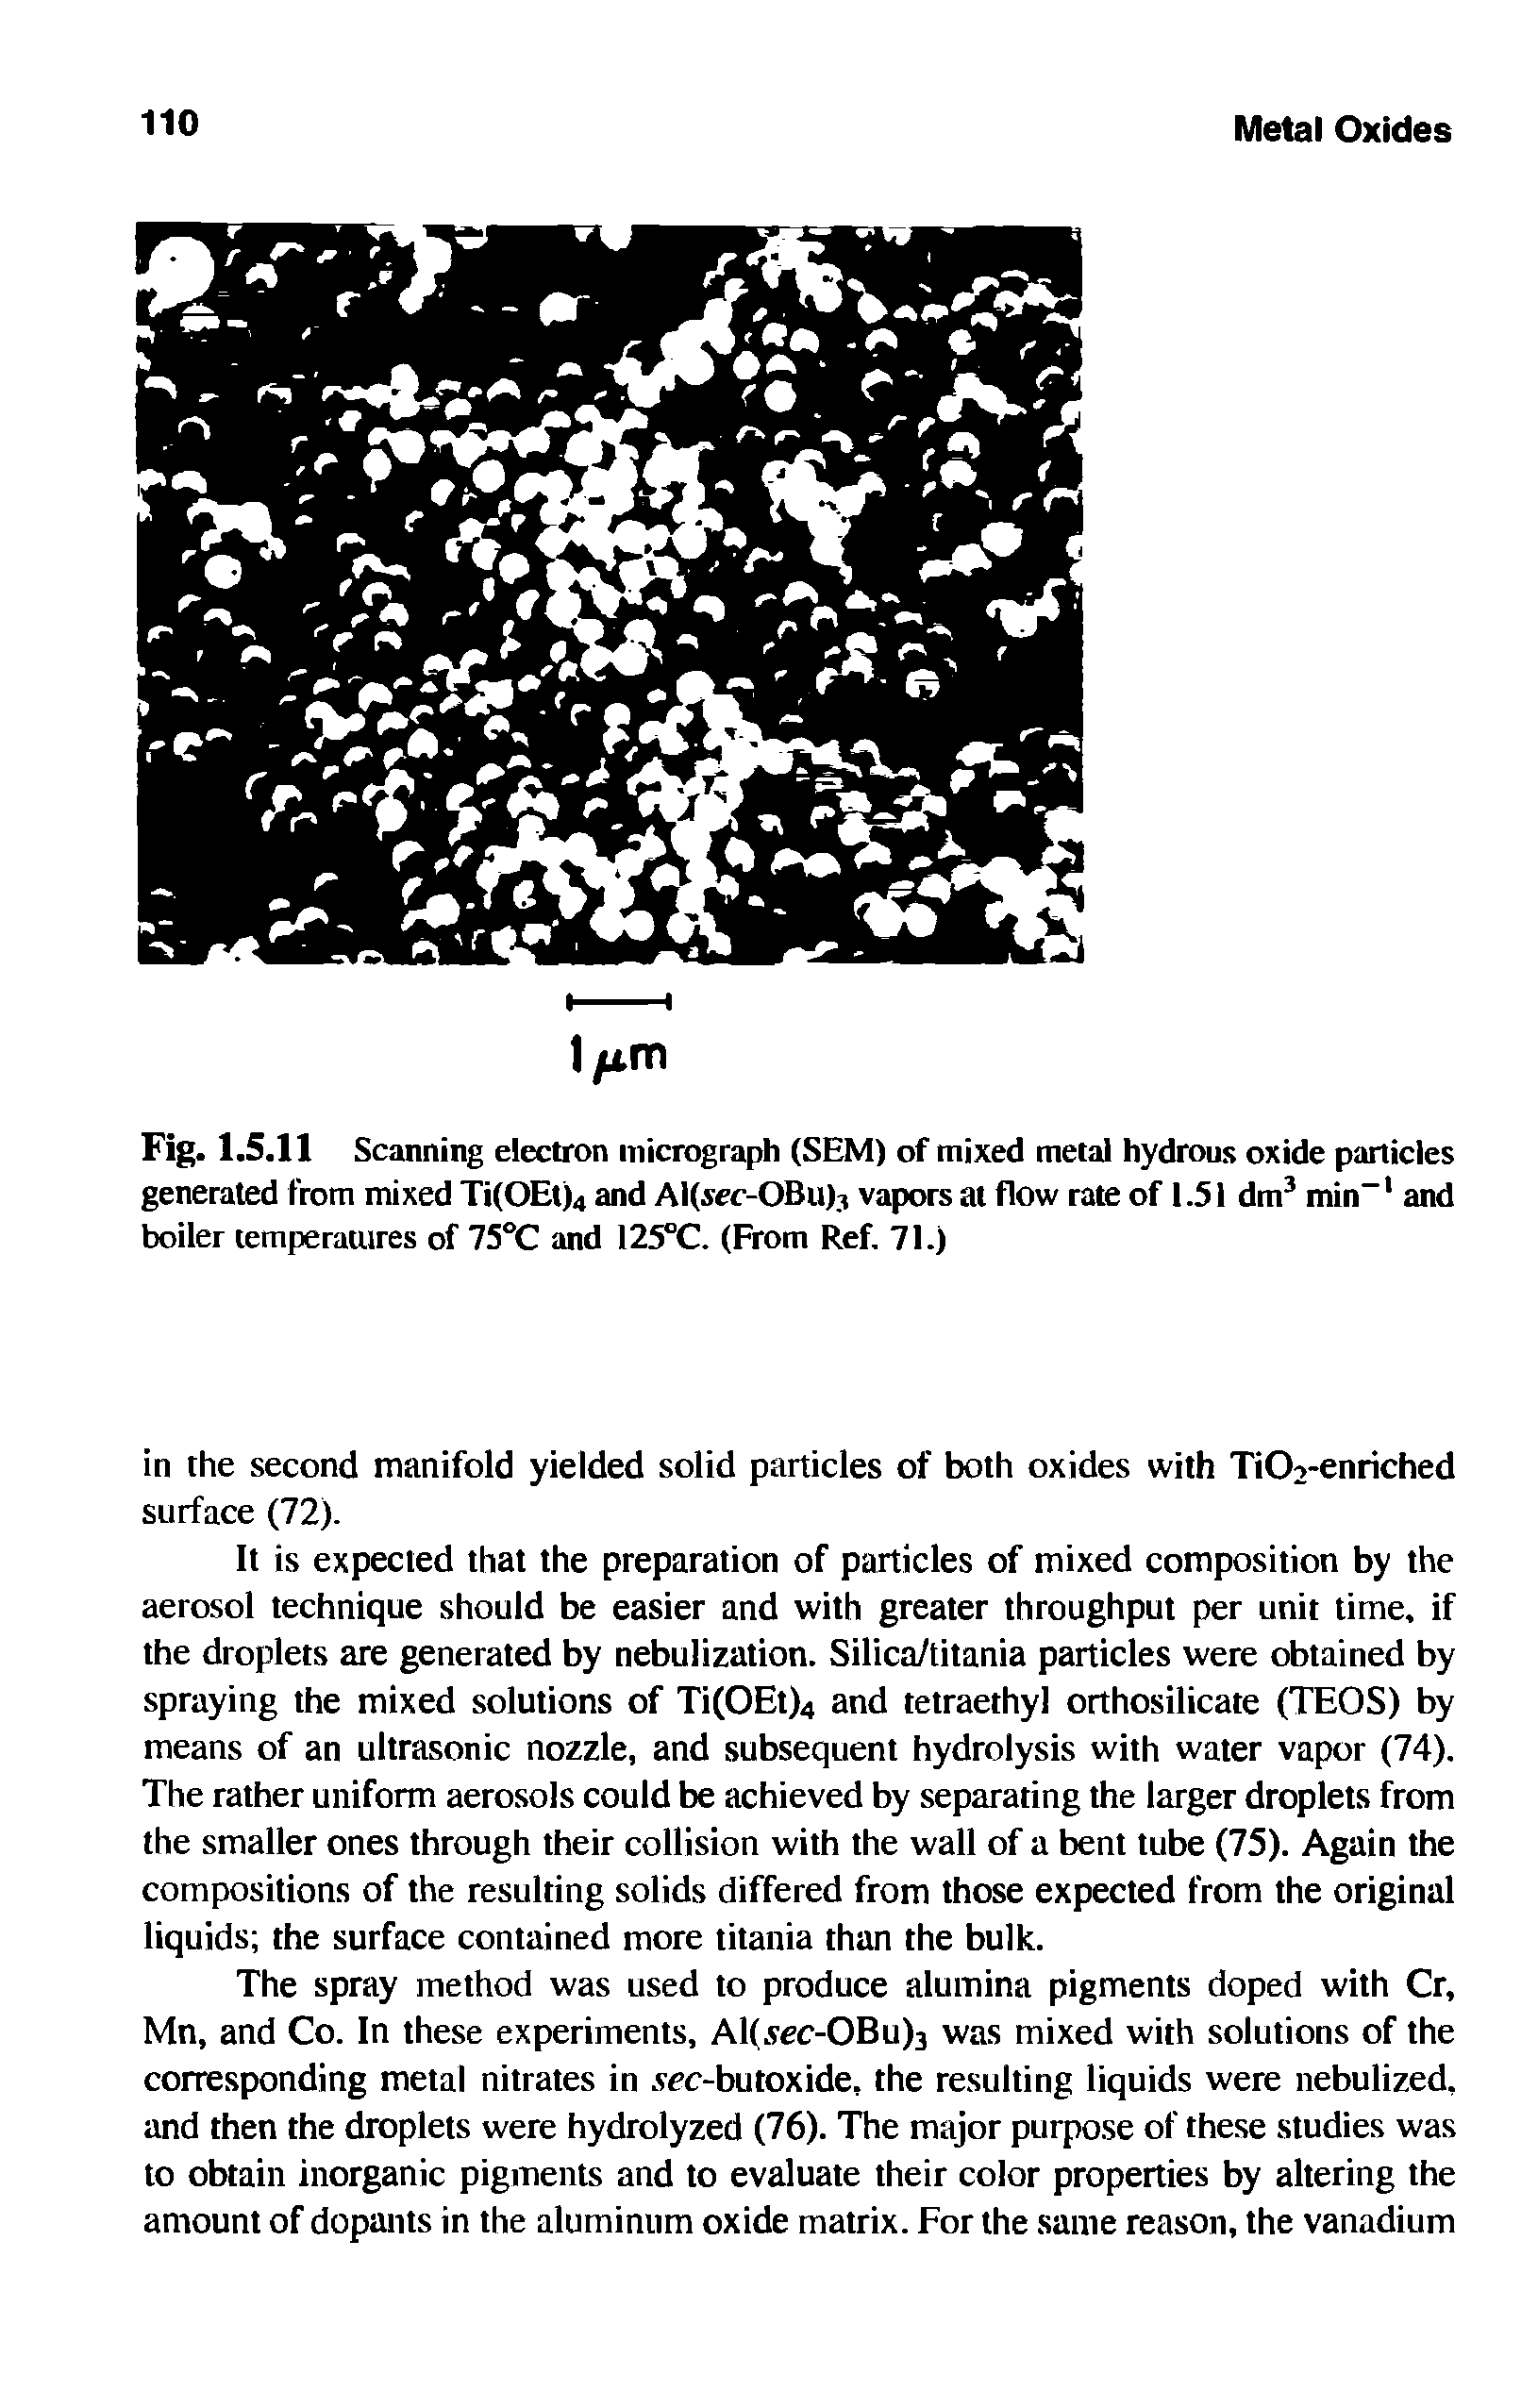 Fig. 1.5.11 Scanning electron micrograph (SEM) of mixed metal hydrous oxide particles generated from mixed Ti(OEt)4 and A1(a -OBu)3 vapors at flow rate of 1.51 dm3 min-1 and boiler temperatures of 75°C and I25°C. (From Ref. 71.)...